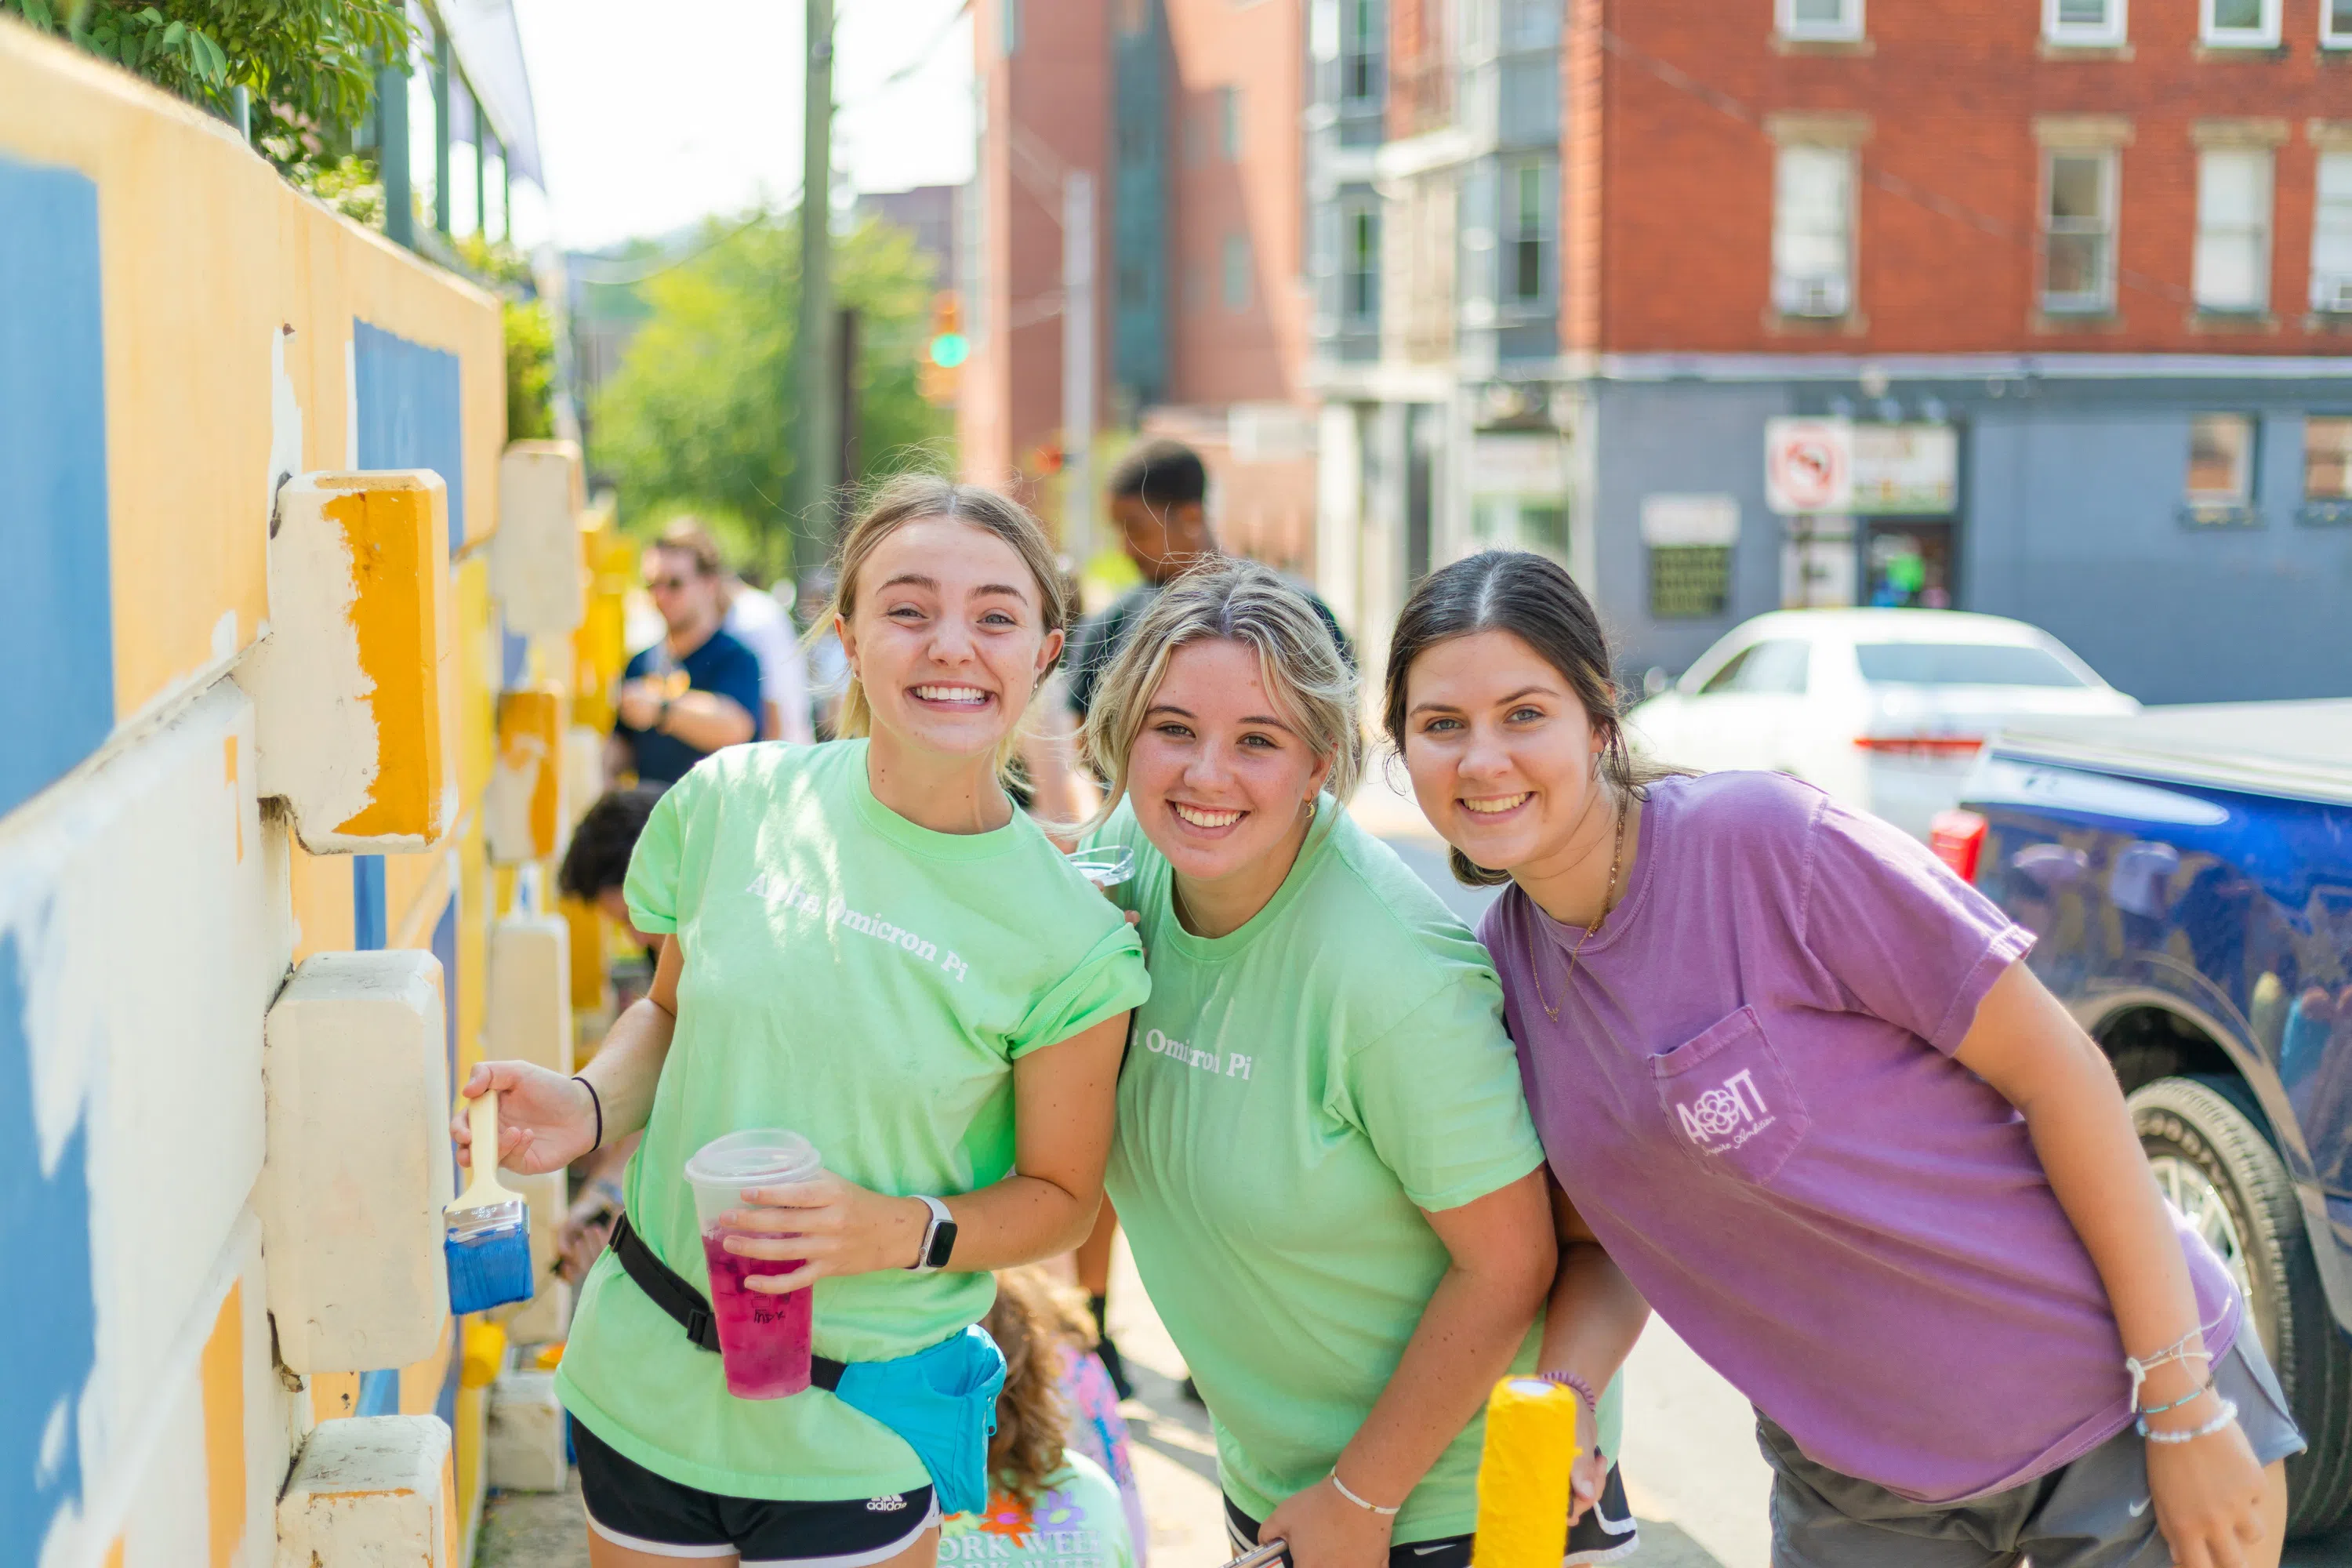 Three members of a sorority pose with painting equipment.